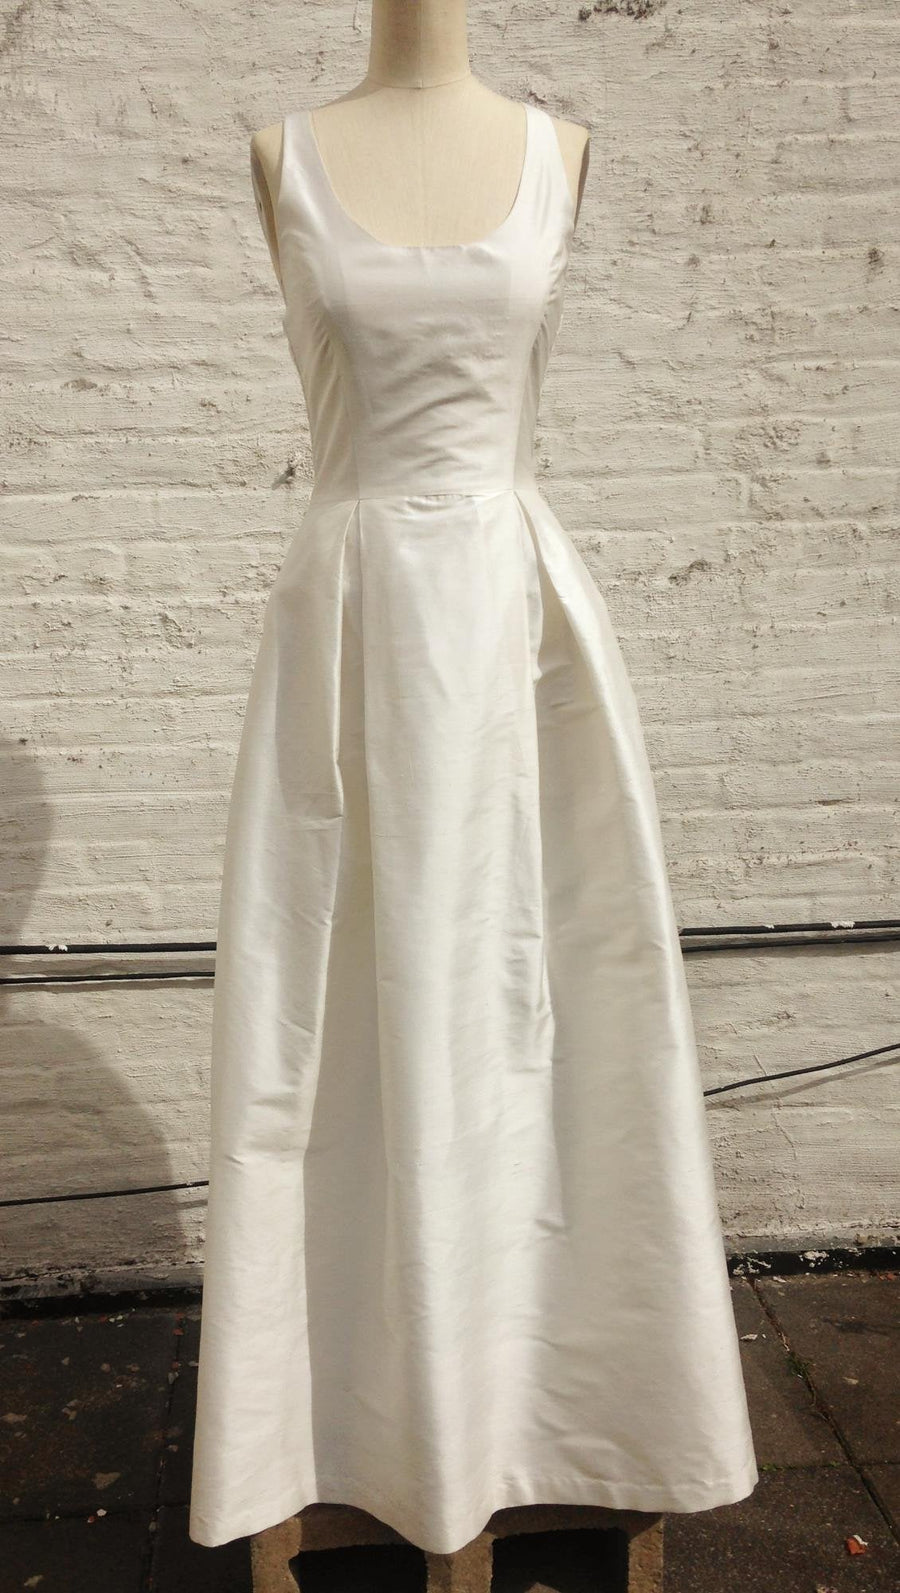 Off White Modern Ball Gown with Lace Racer Back, size X-small